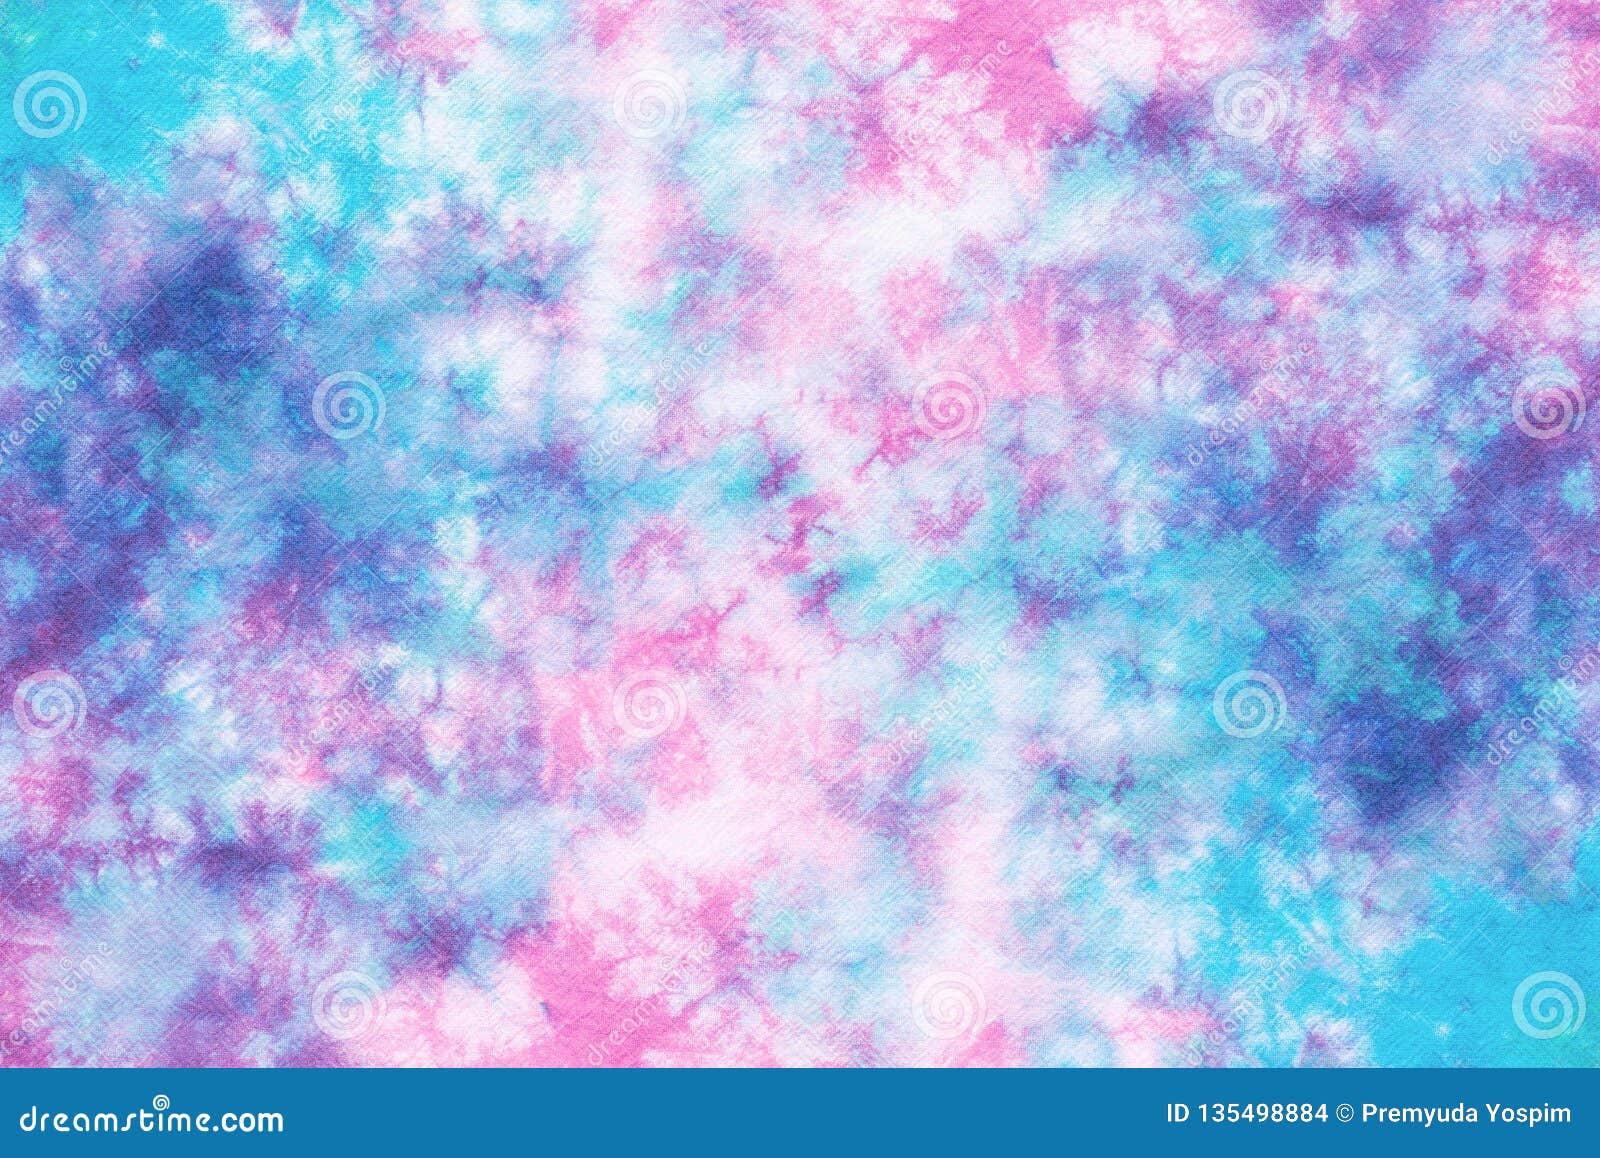 Colorful Tie Dye Pattern Abstract Background Stock Illustration